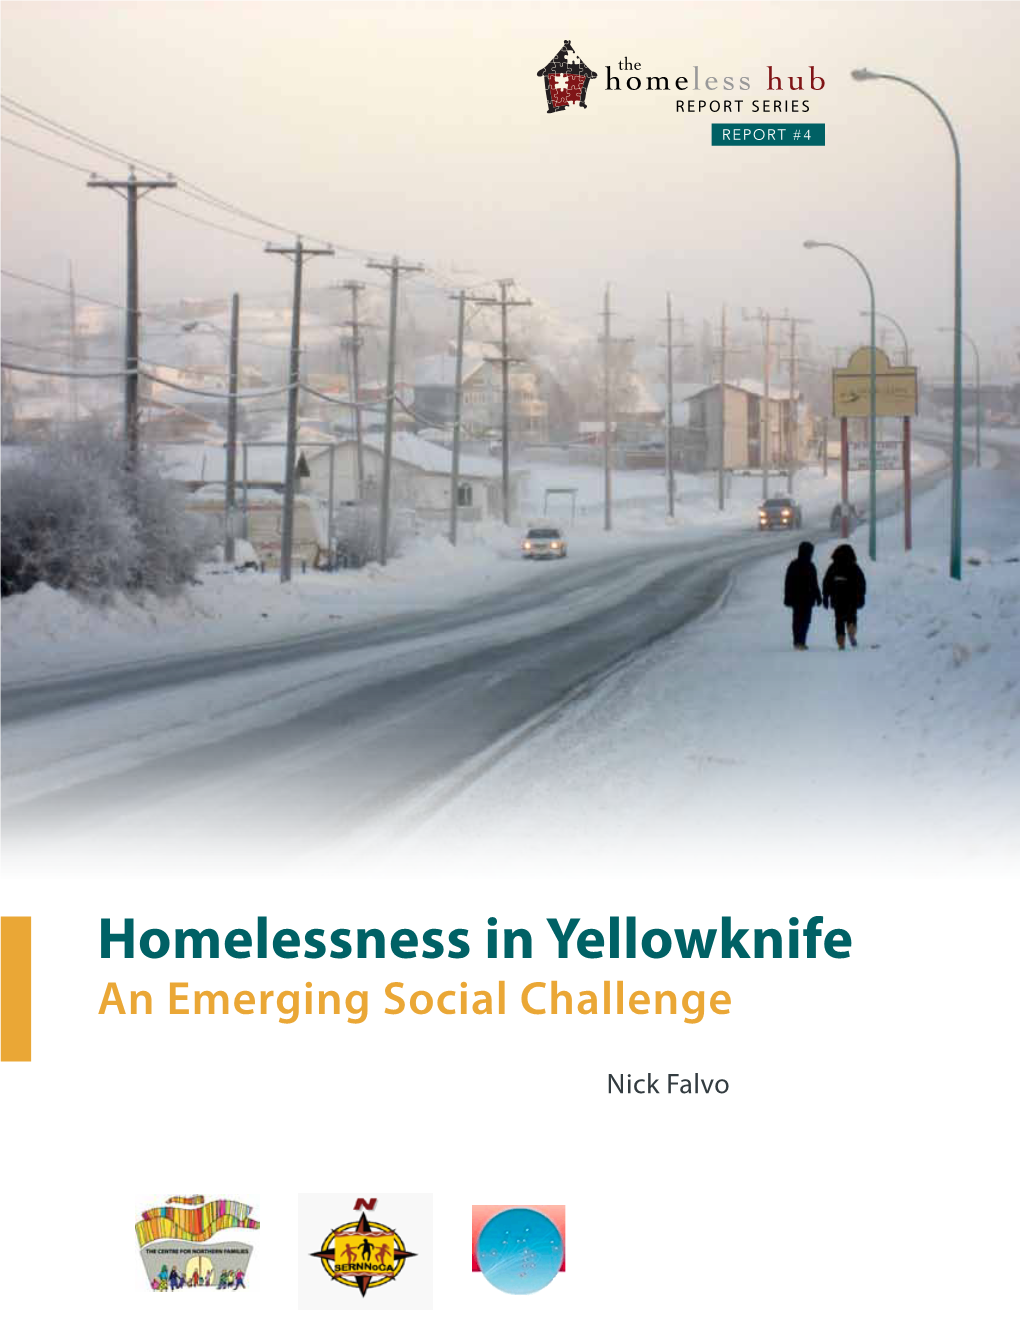 Homelessness in Yellowknife an Emerging Social Challenge